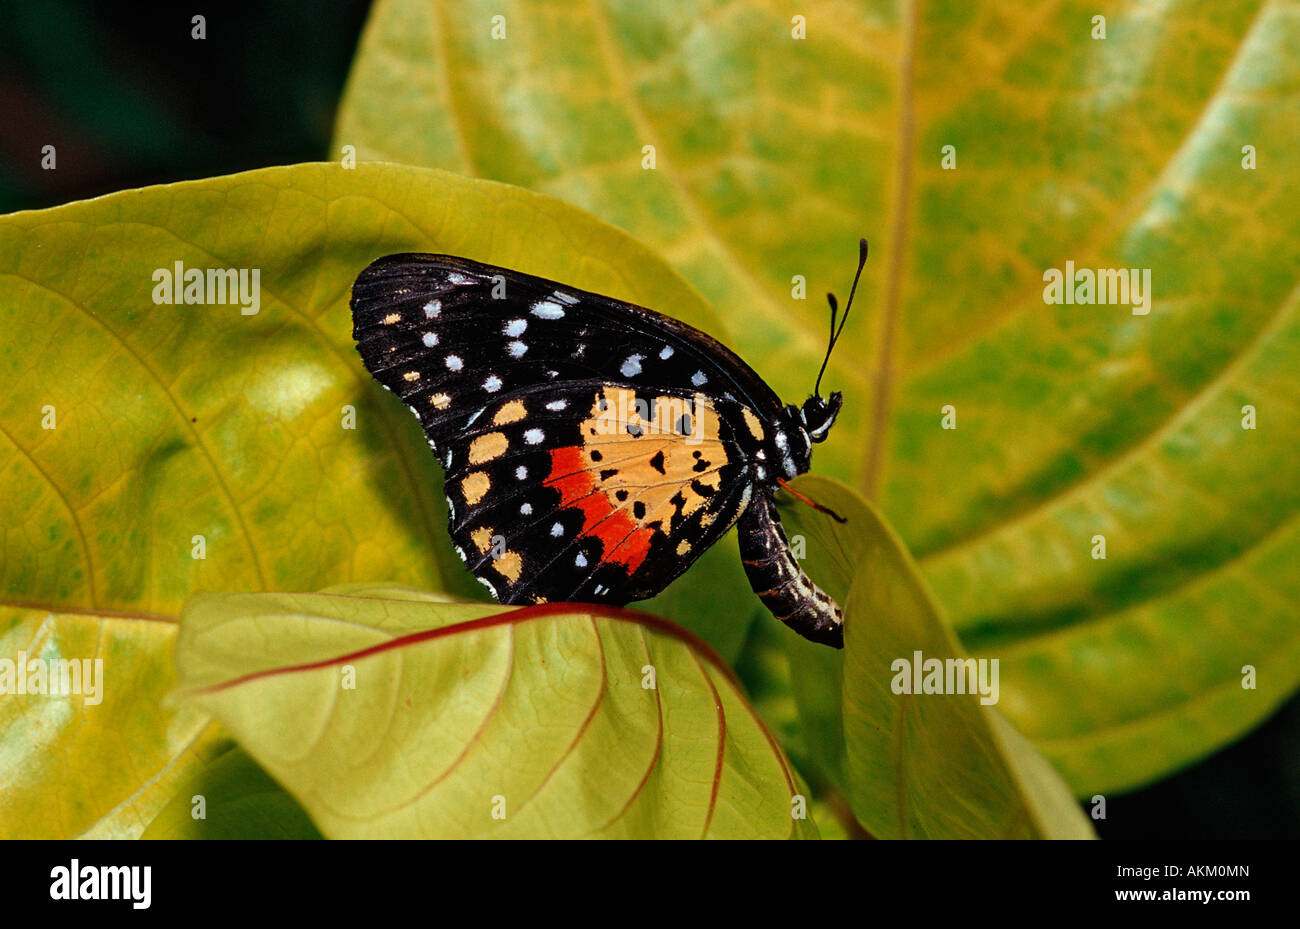 Tropical butterfly Costa Rica Stock Photo